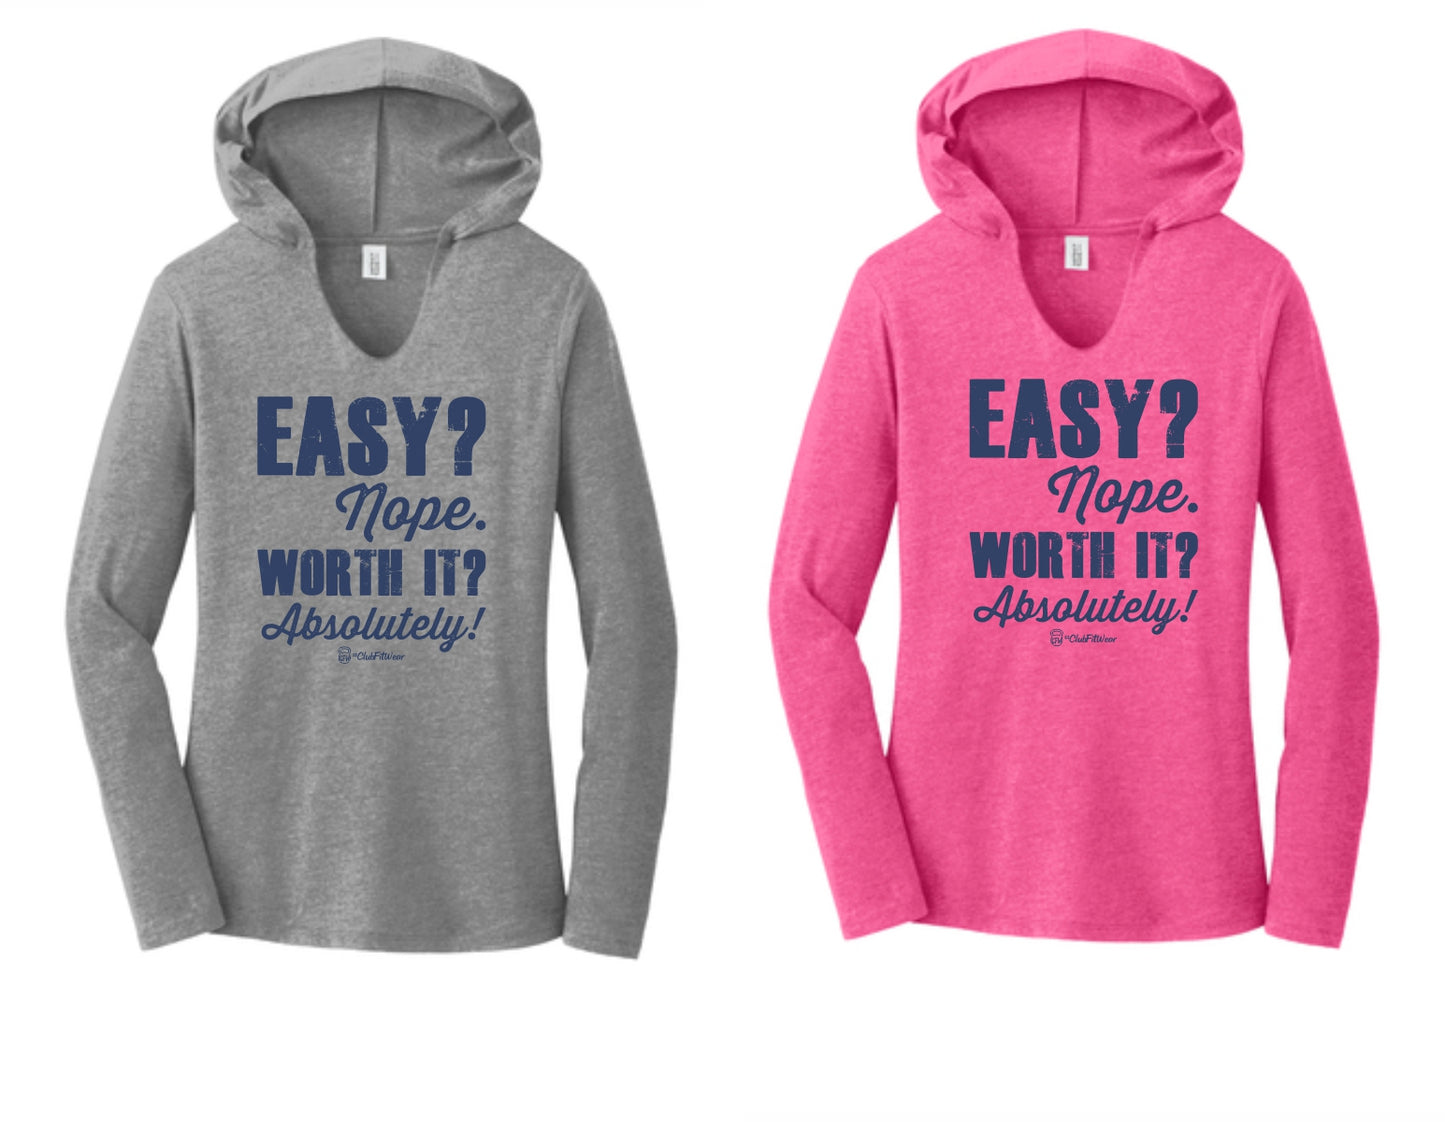 Easy? Nope. Worth it? Absolutely! - Women's V-Neck Hooded Pullover